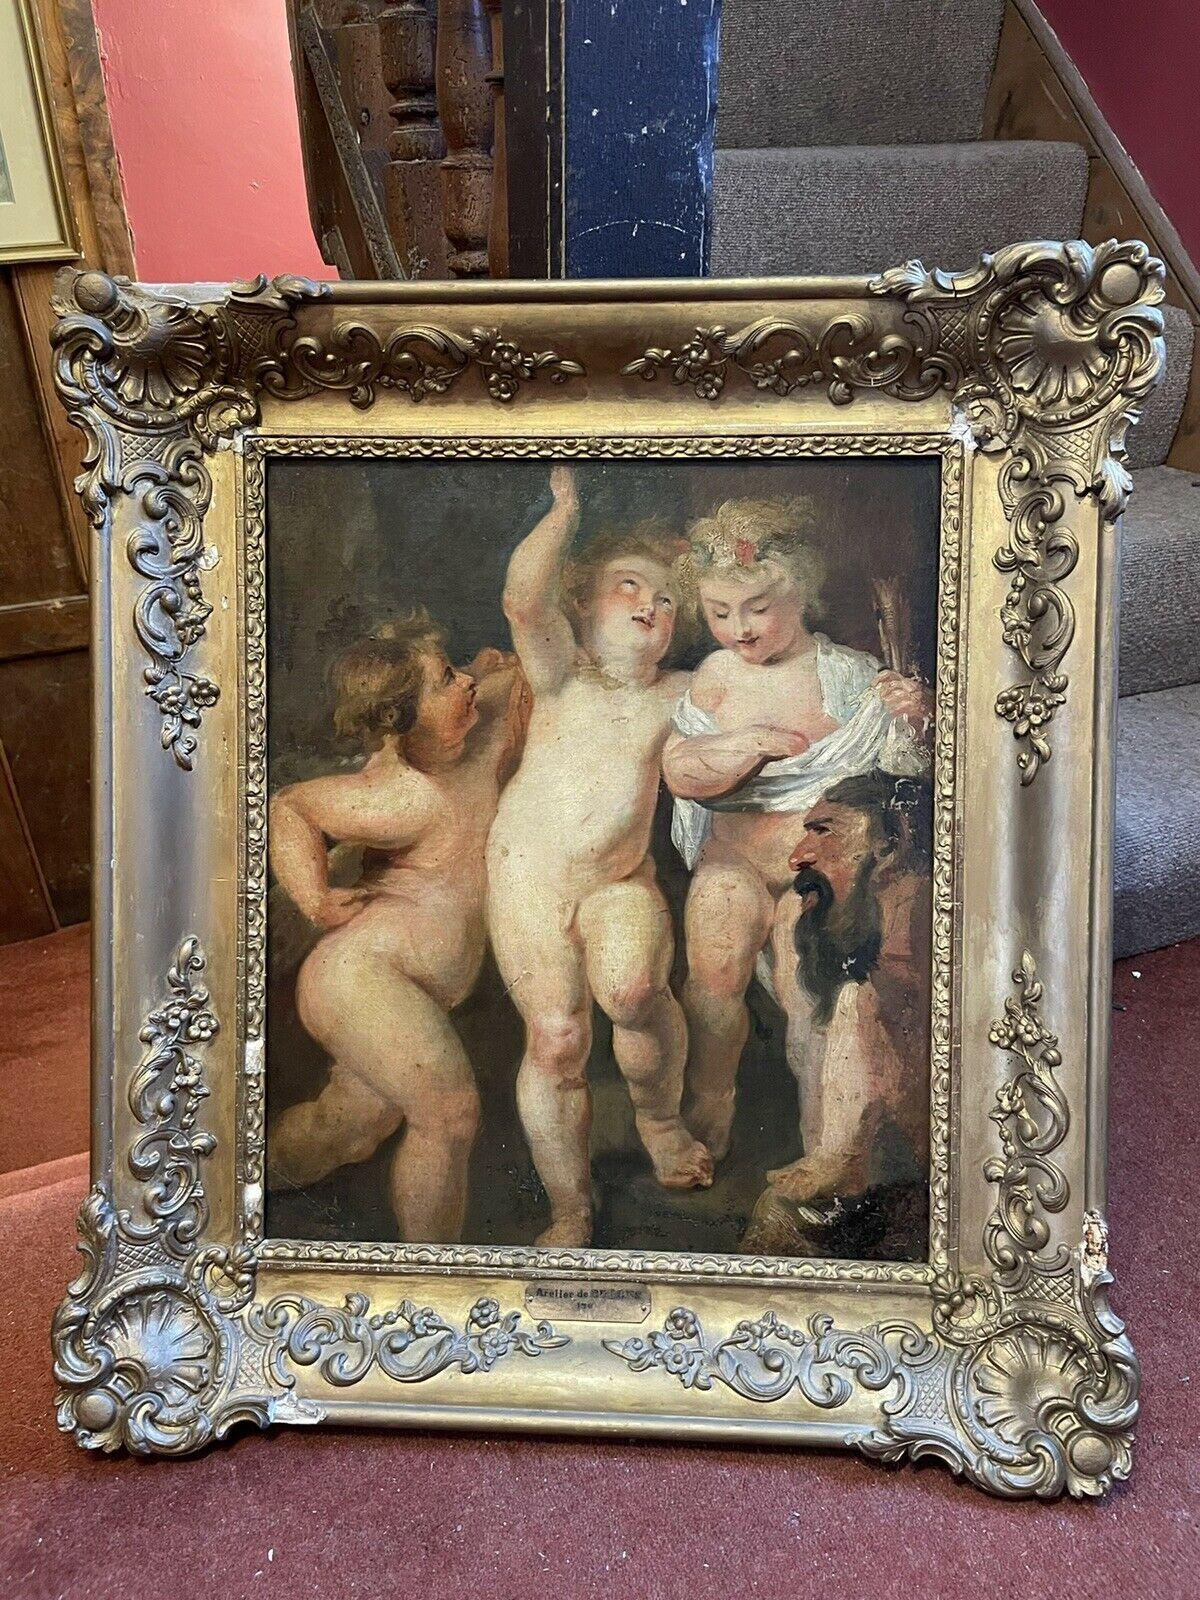 FINE 18TH CENTURY FRENCH OLD MASTER OIL AFTER RUBENS - CHERUBS - TO RESTORE - Painting by (After) Peter Paul Rubens